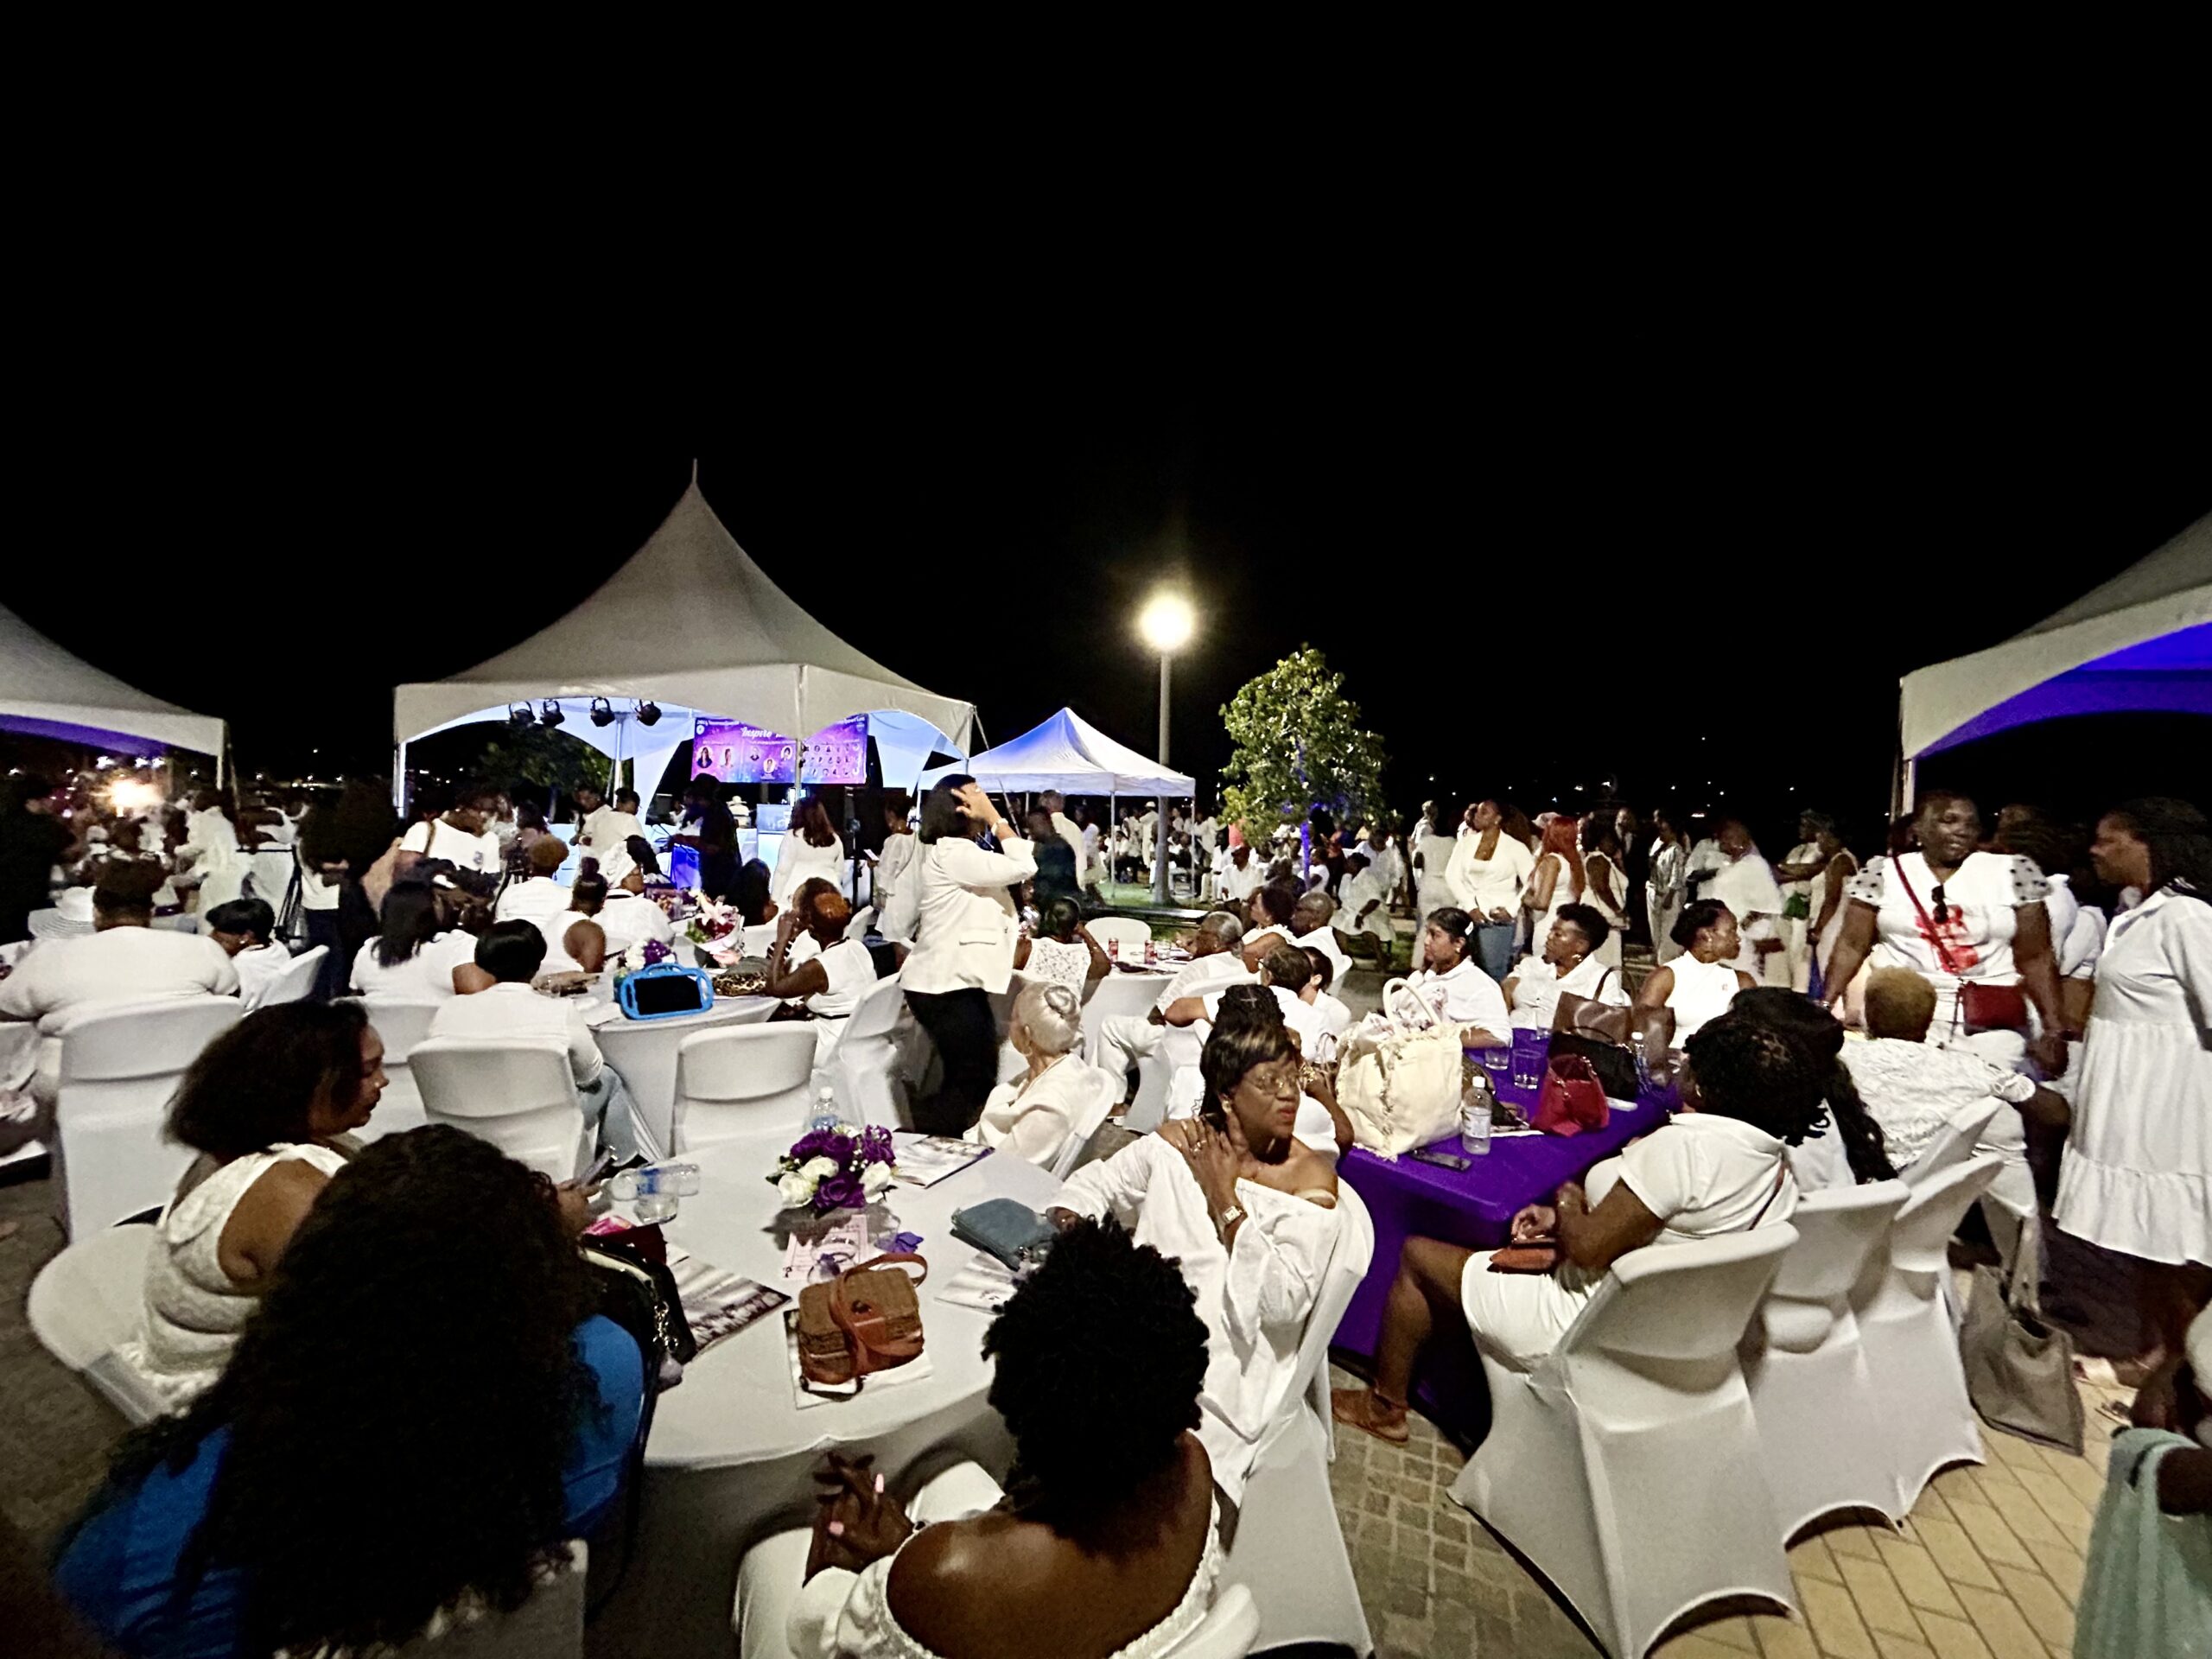 The St. Thomas Waterfront Promenade was packed with eventgoers celebrating International Women’s Day. (Photo by Nyomi Gumbs)